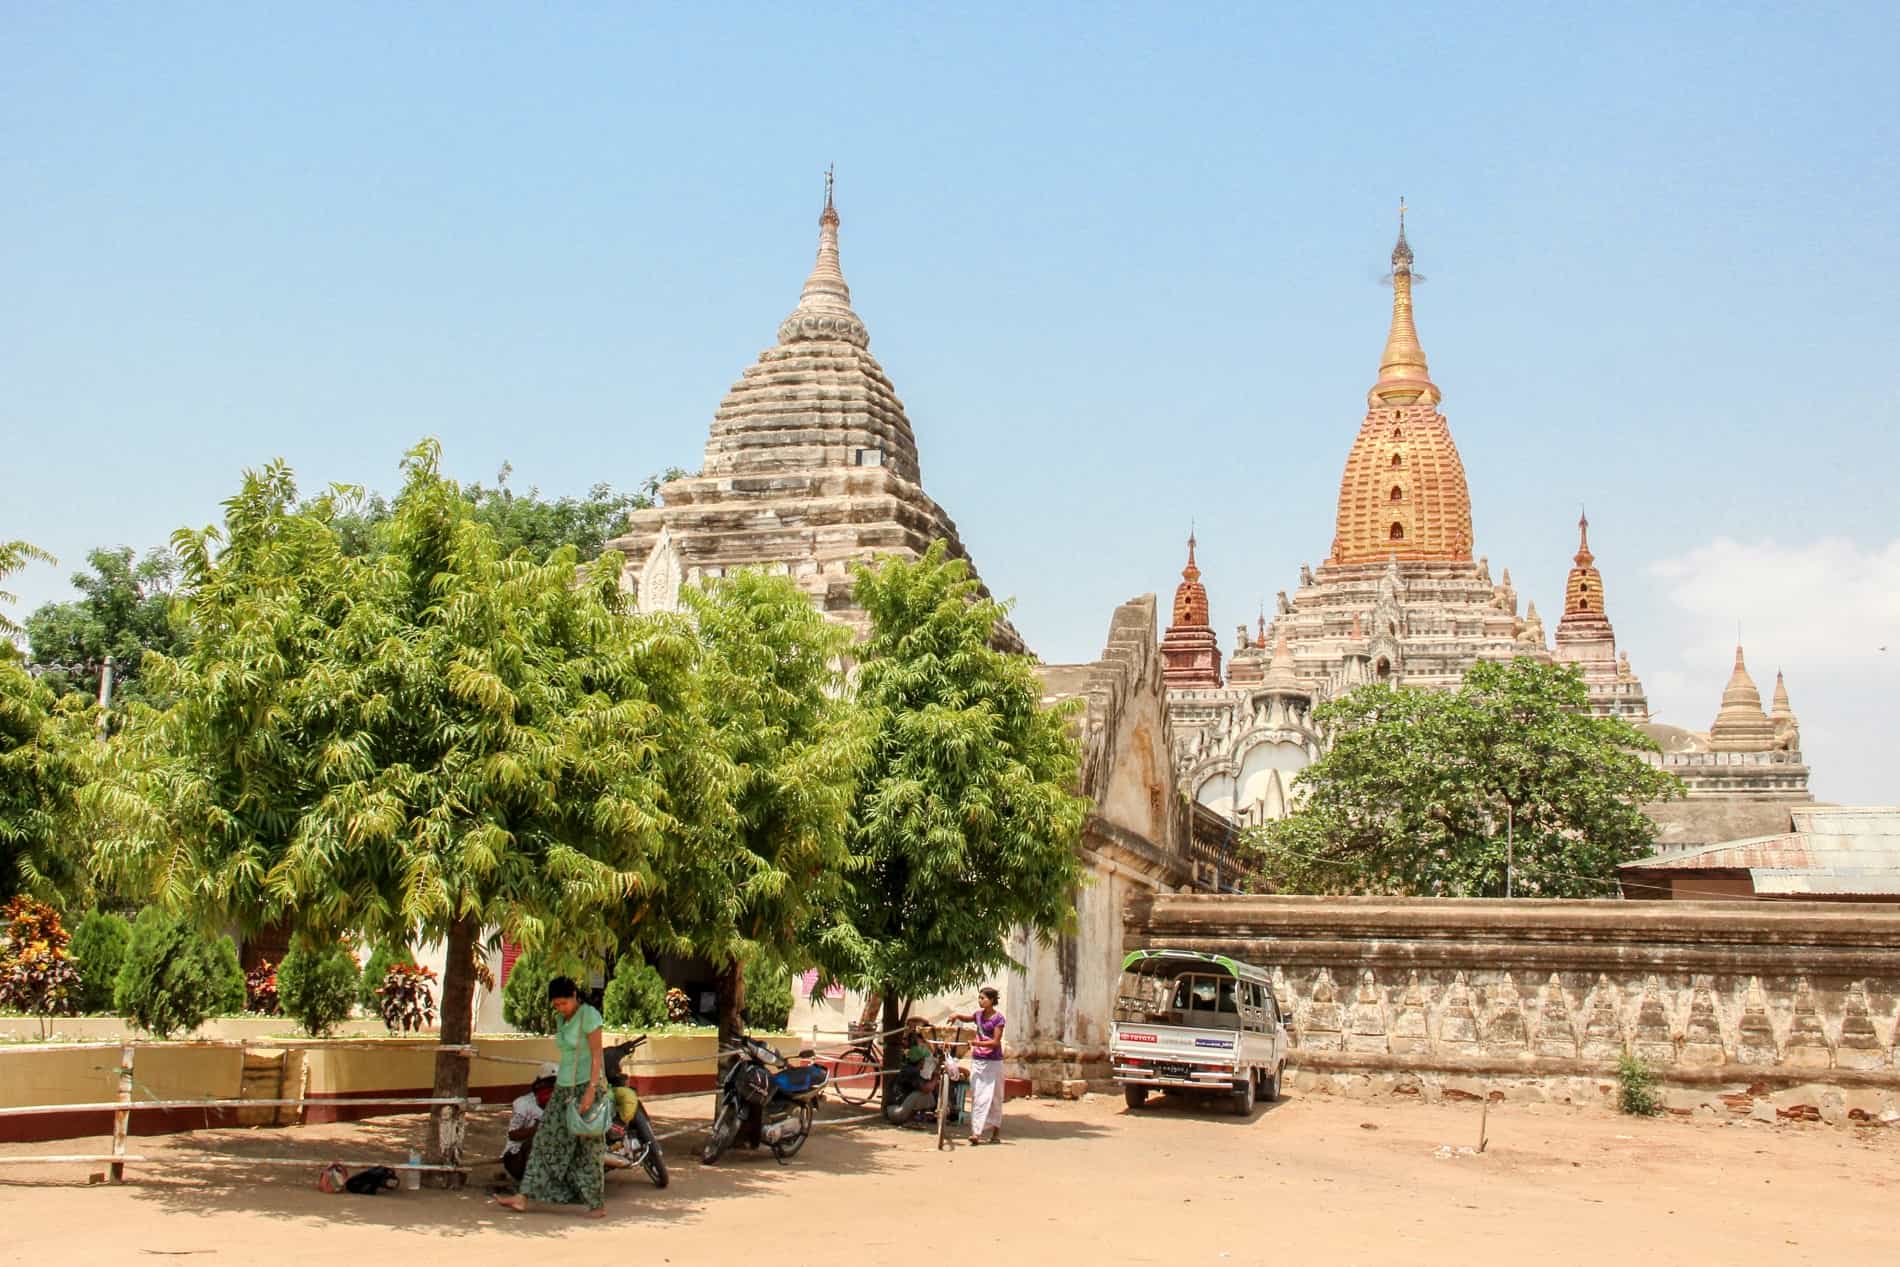 A woman pushes a bike in front of a tree at the entrance to a large temple complex with white and gold pagodas, in the dusty orange grounds of Bagan, Myanmar.